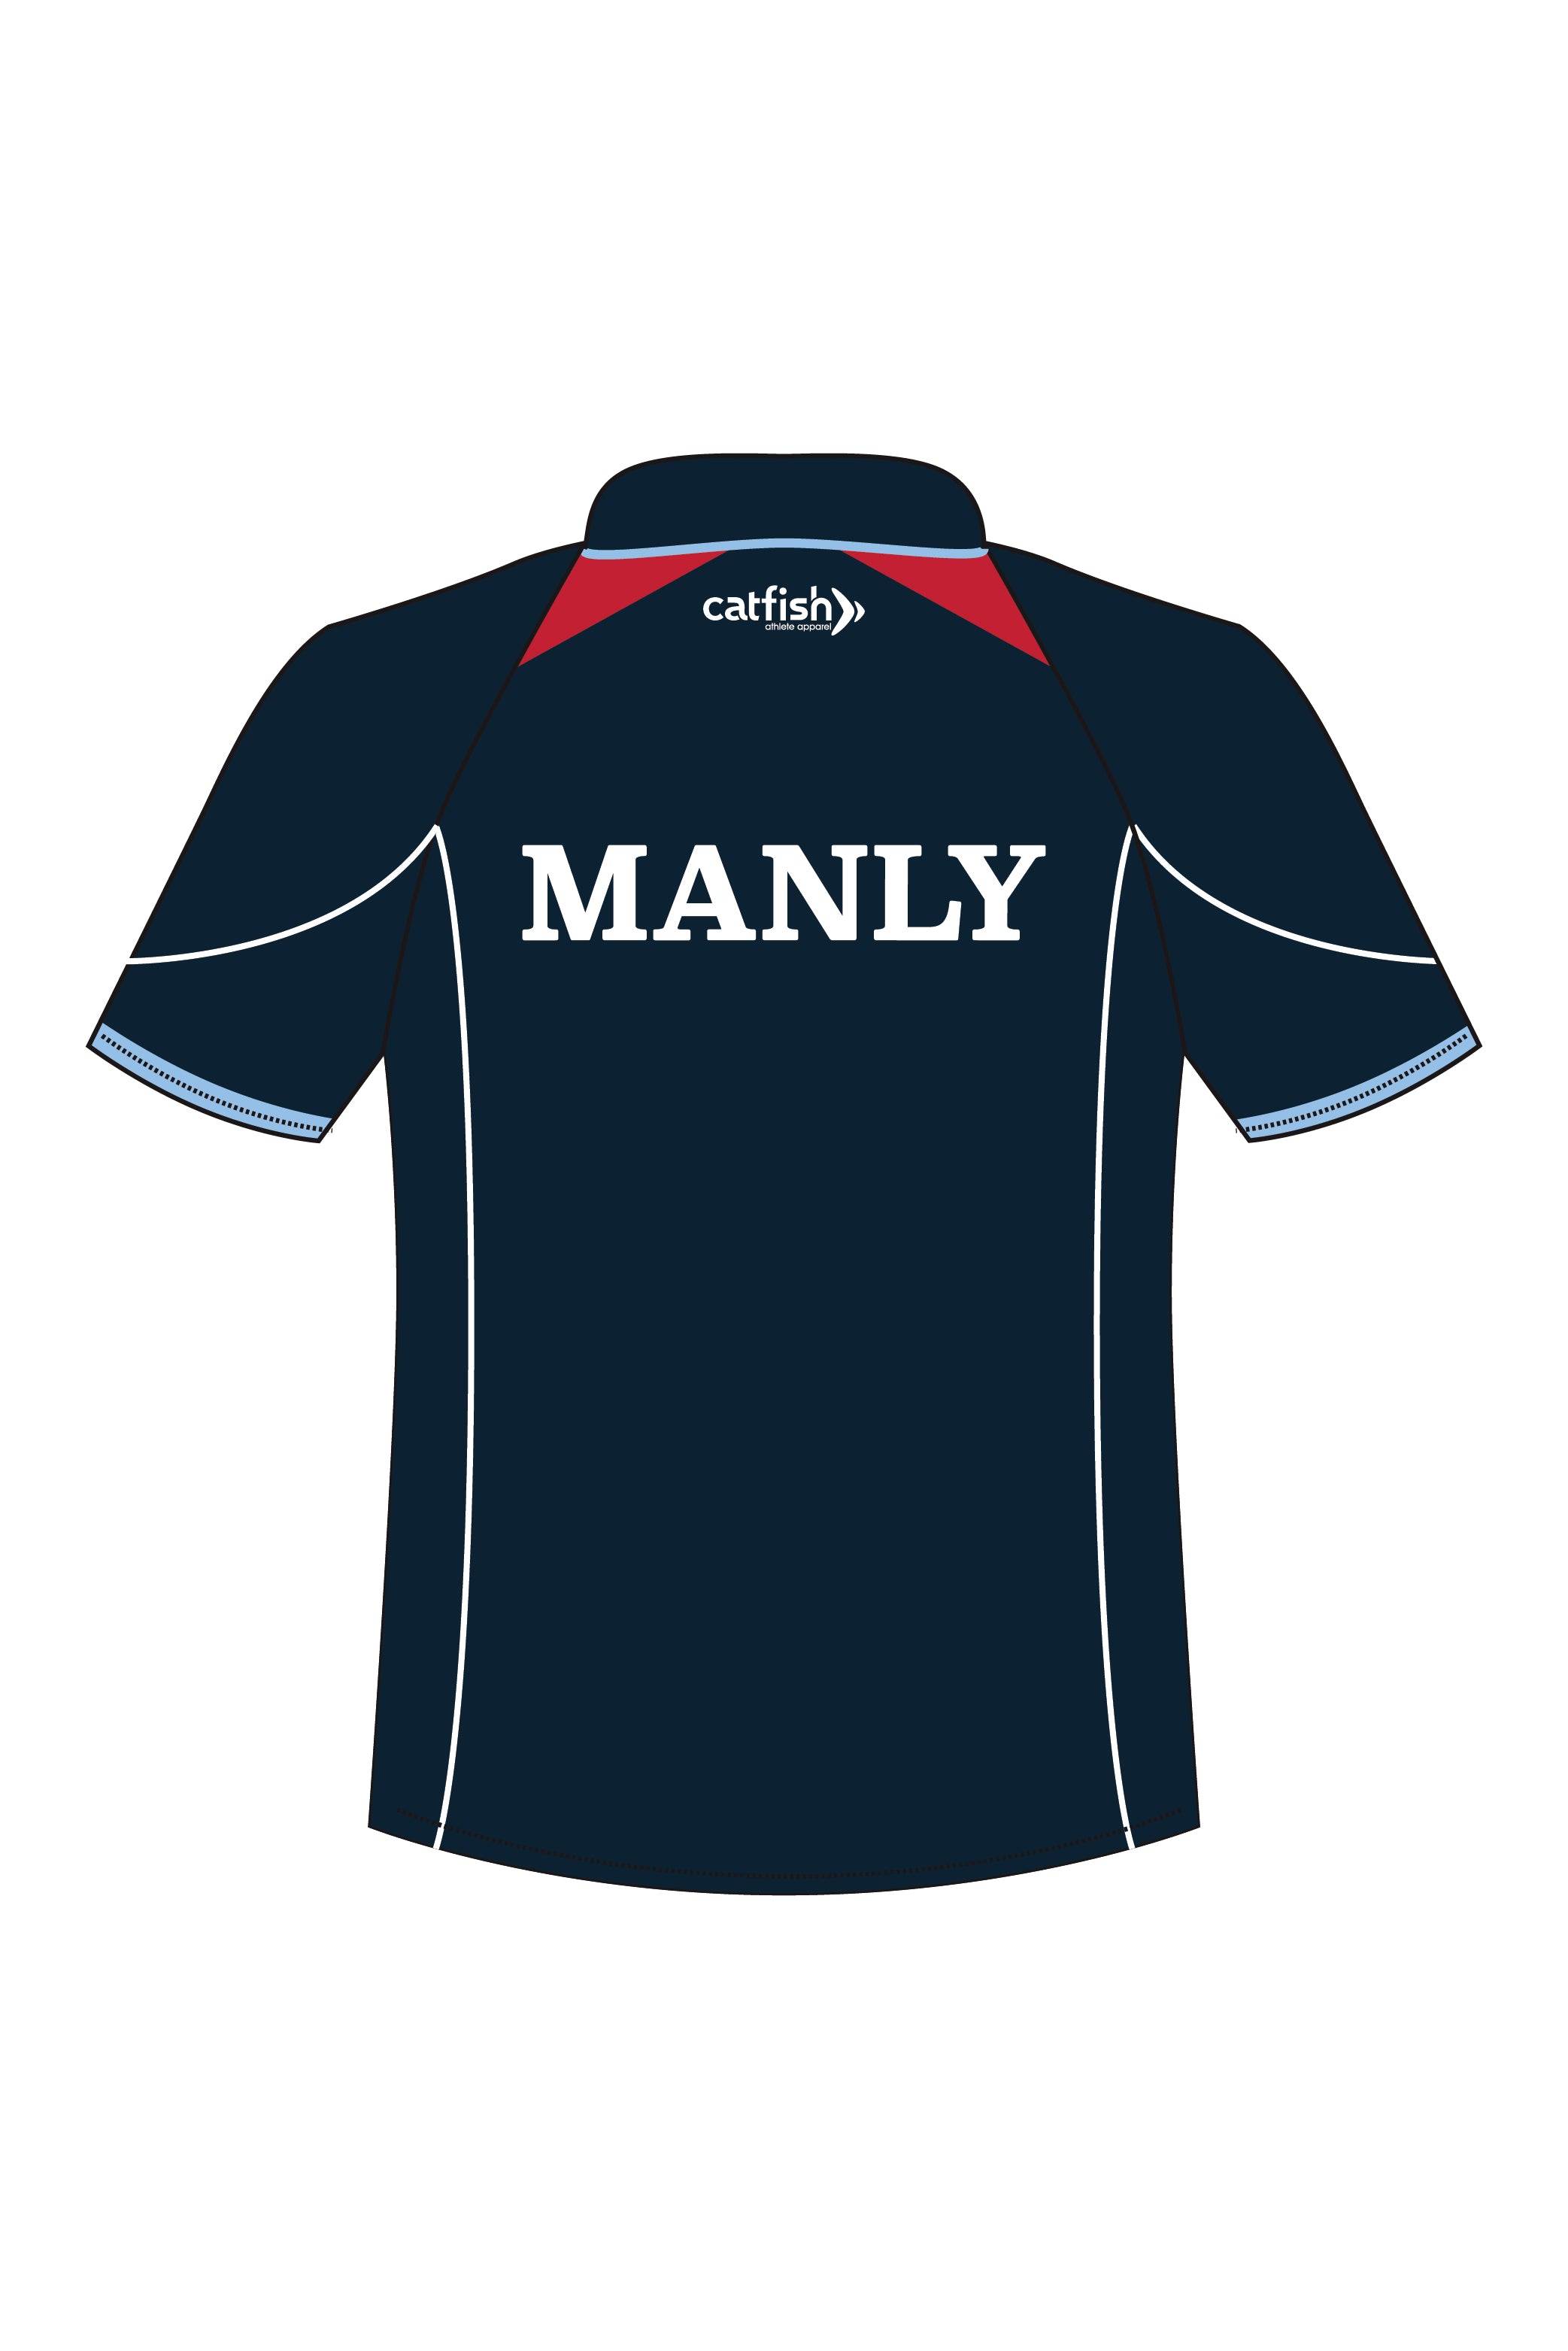 Manly Swimming Club Women's Polo